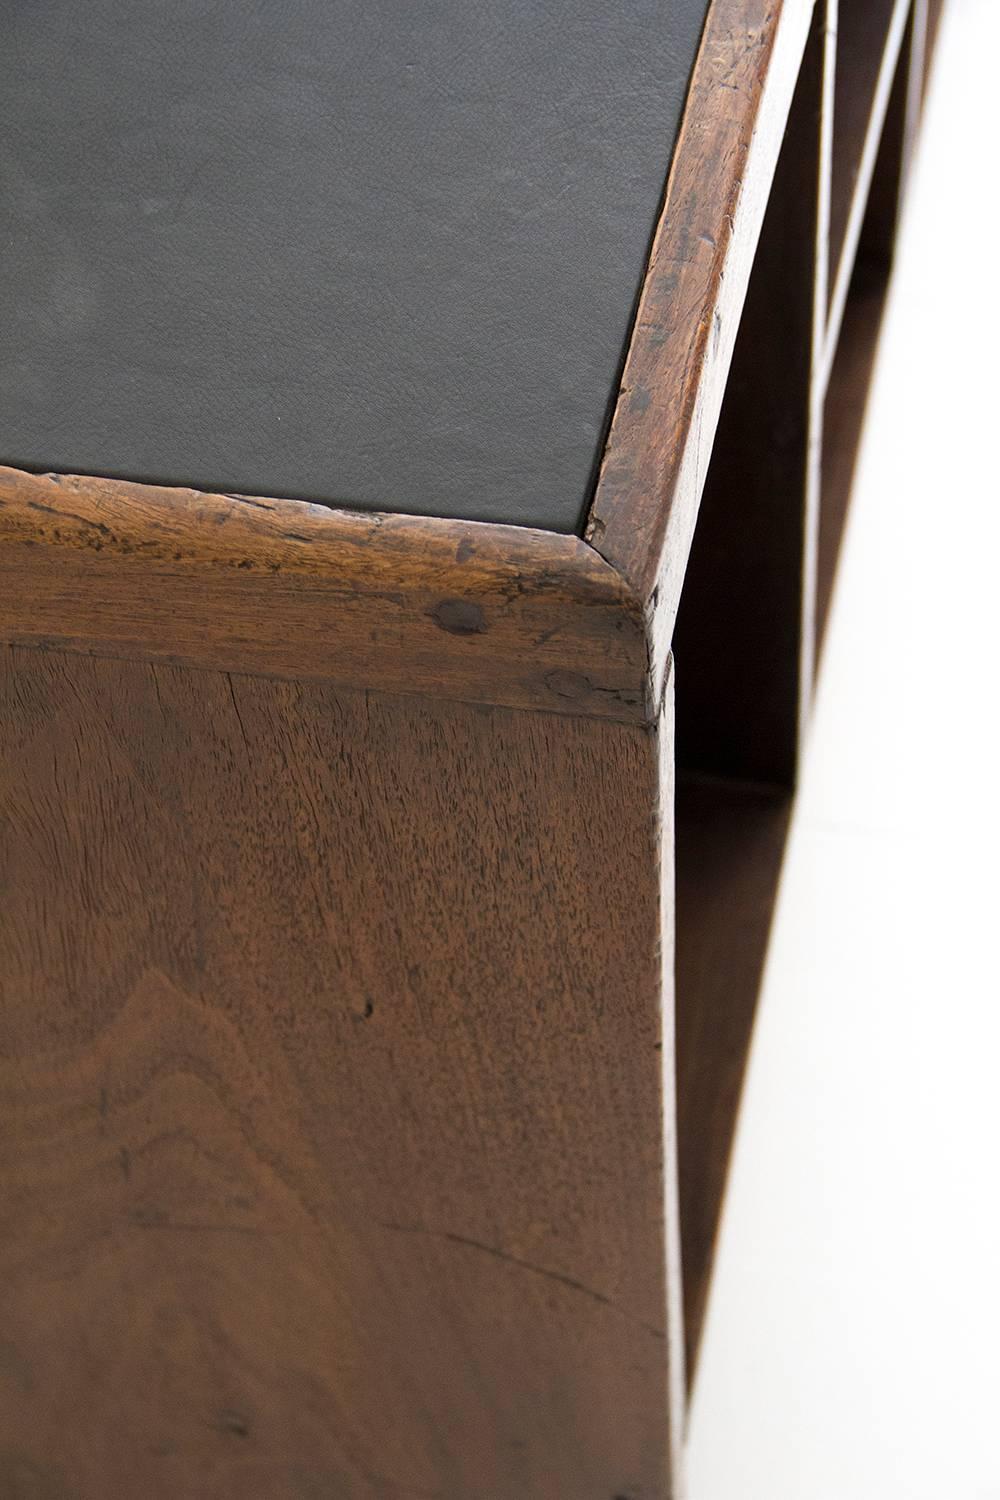 Pierre Jeanneret Office Desk for Chandigarh, Wood and Leather, circa 1950, India For Sale 1